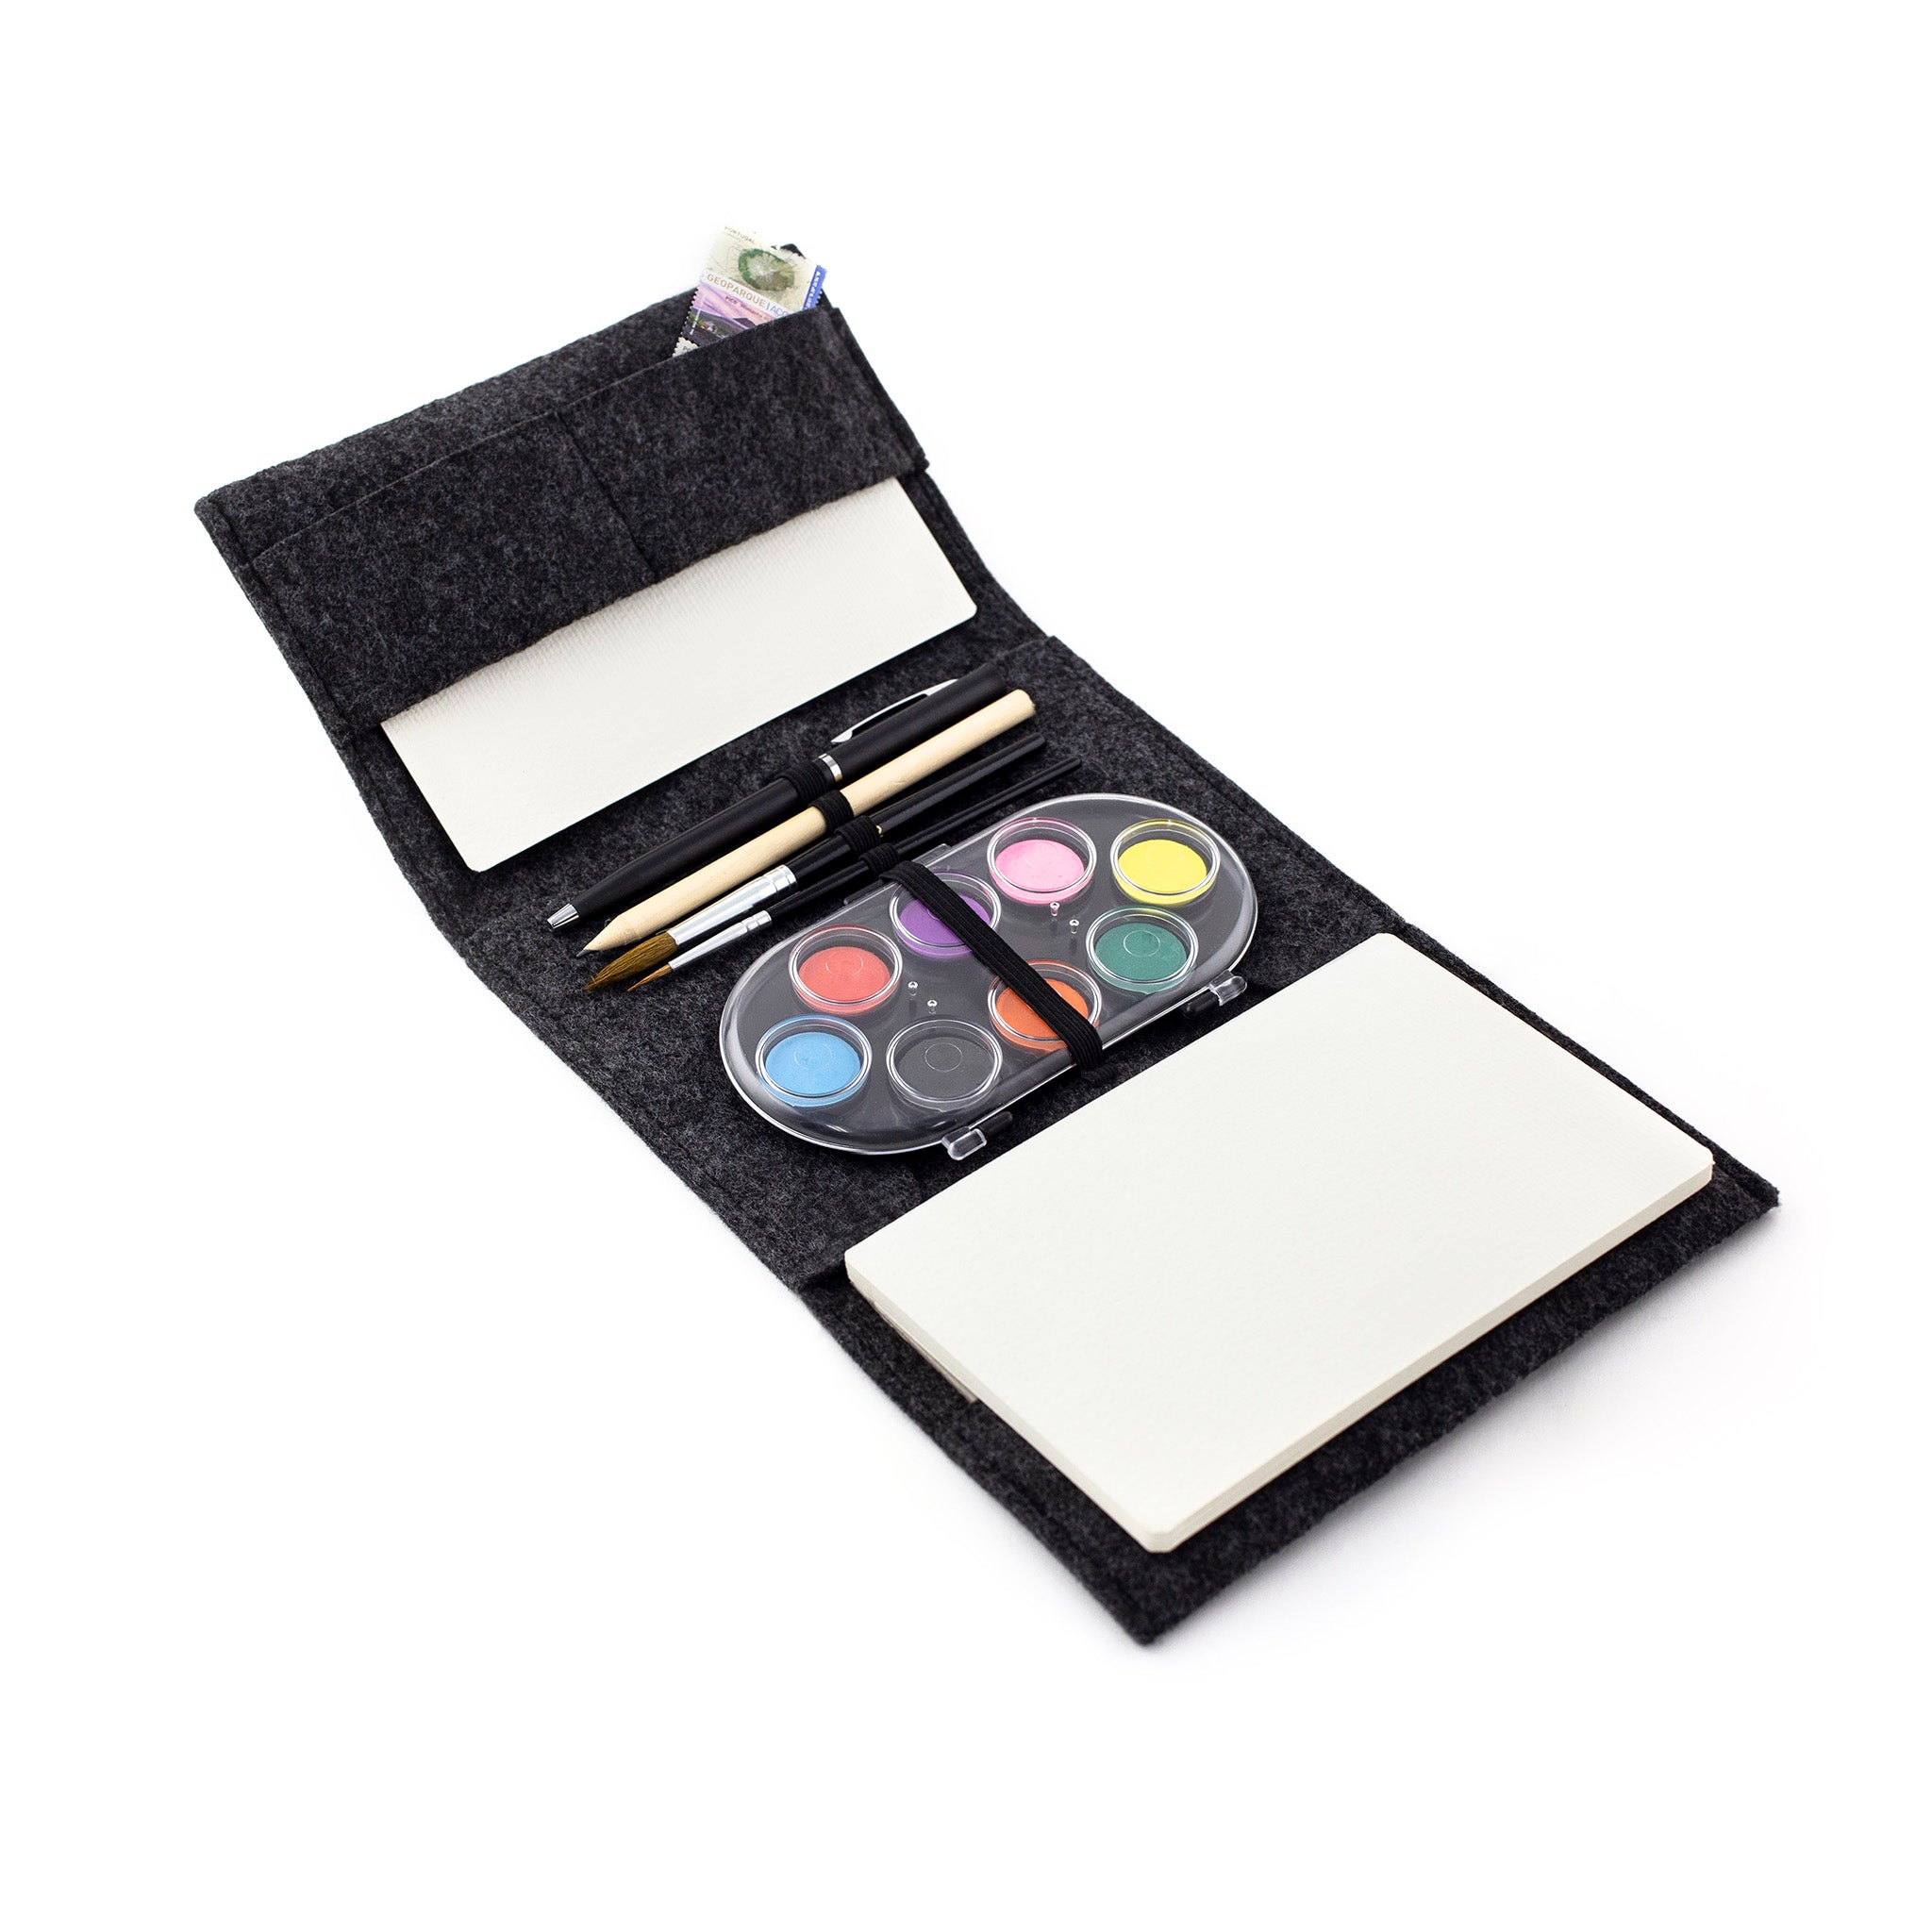 Compact collapsible Watercolor Travel Brush perfect for Urban Sketching